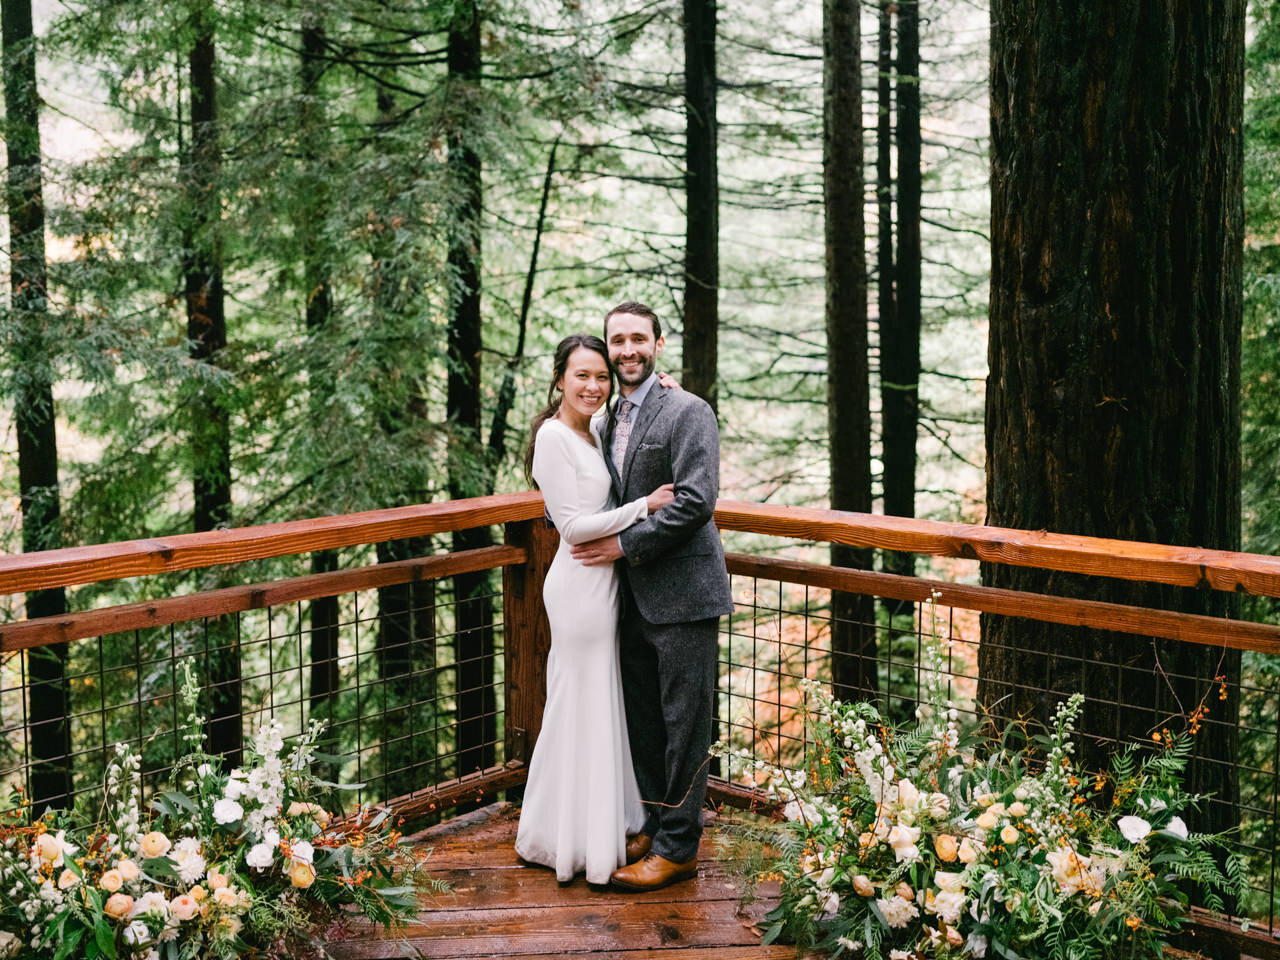  Bride and groom pose on redwood deck in Hoyt arboretum after wedding ceremony with large floral centerpieces on each side 